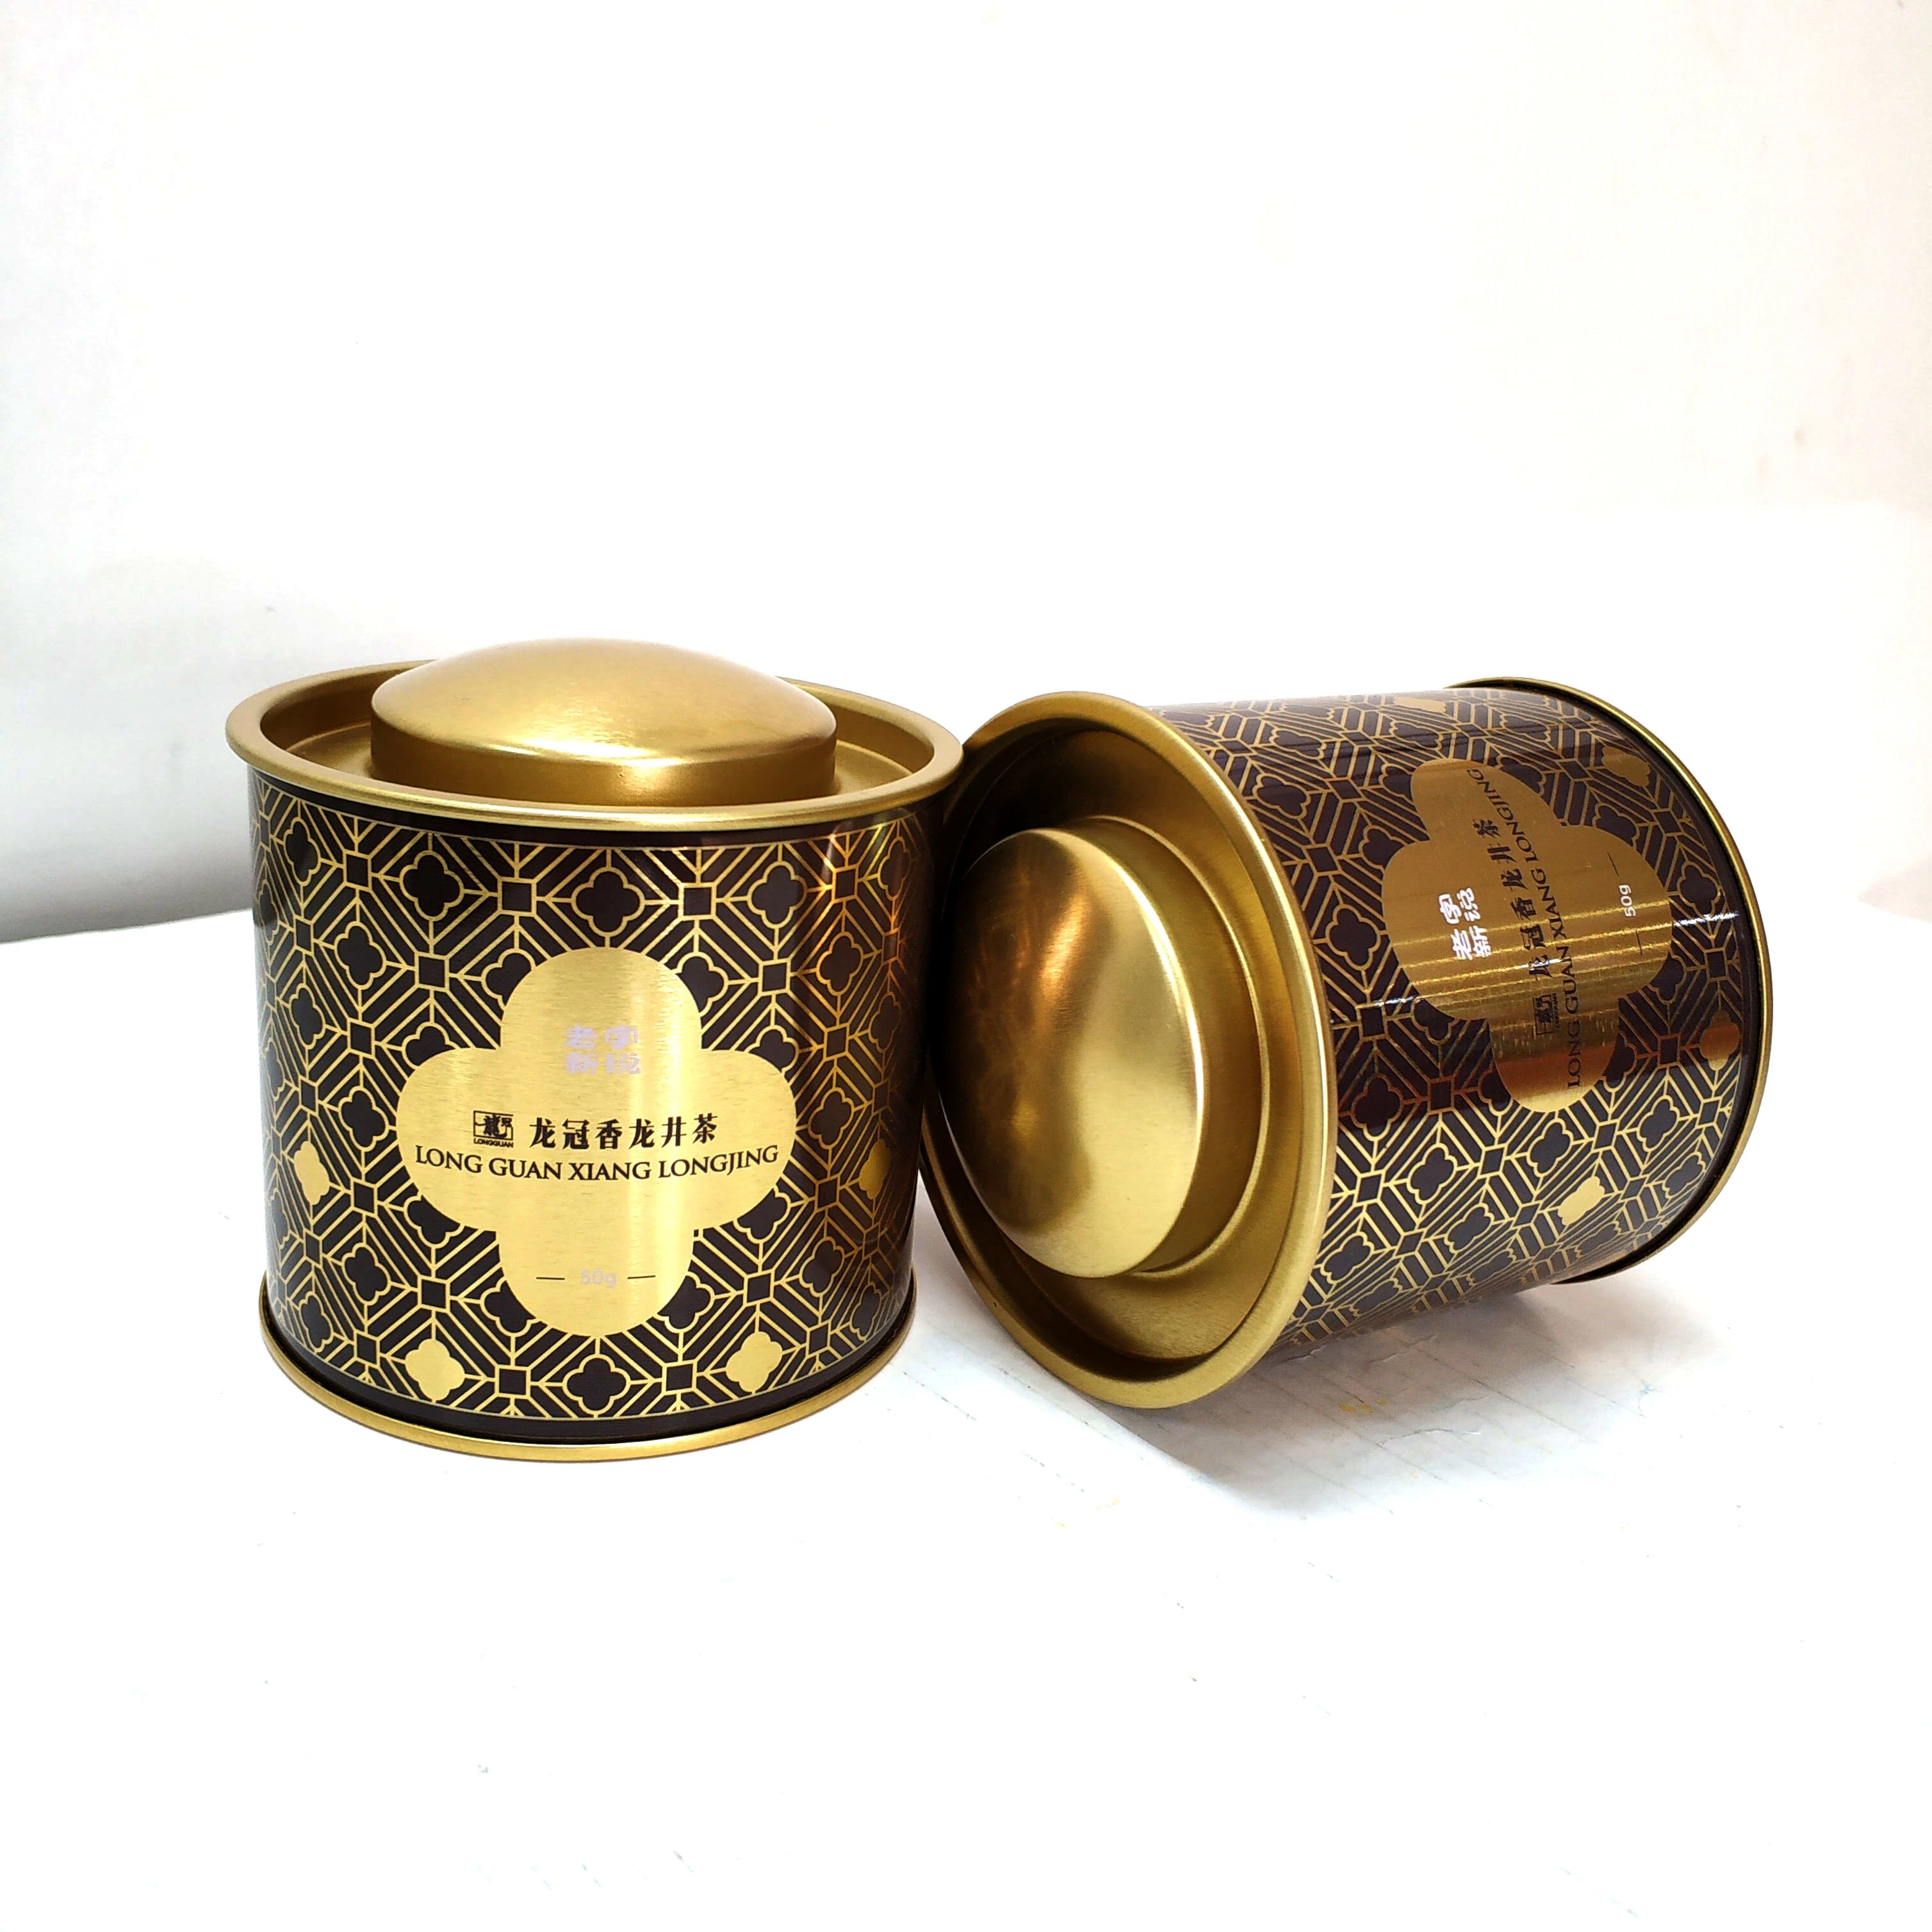 Store your tea and accessories in style with this high-quality decorative tin containers.